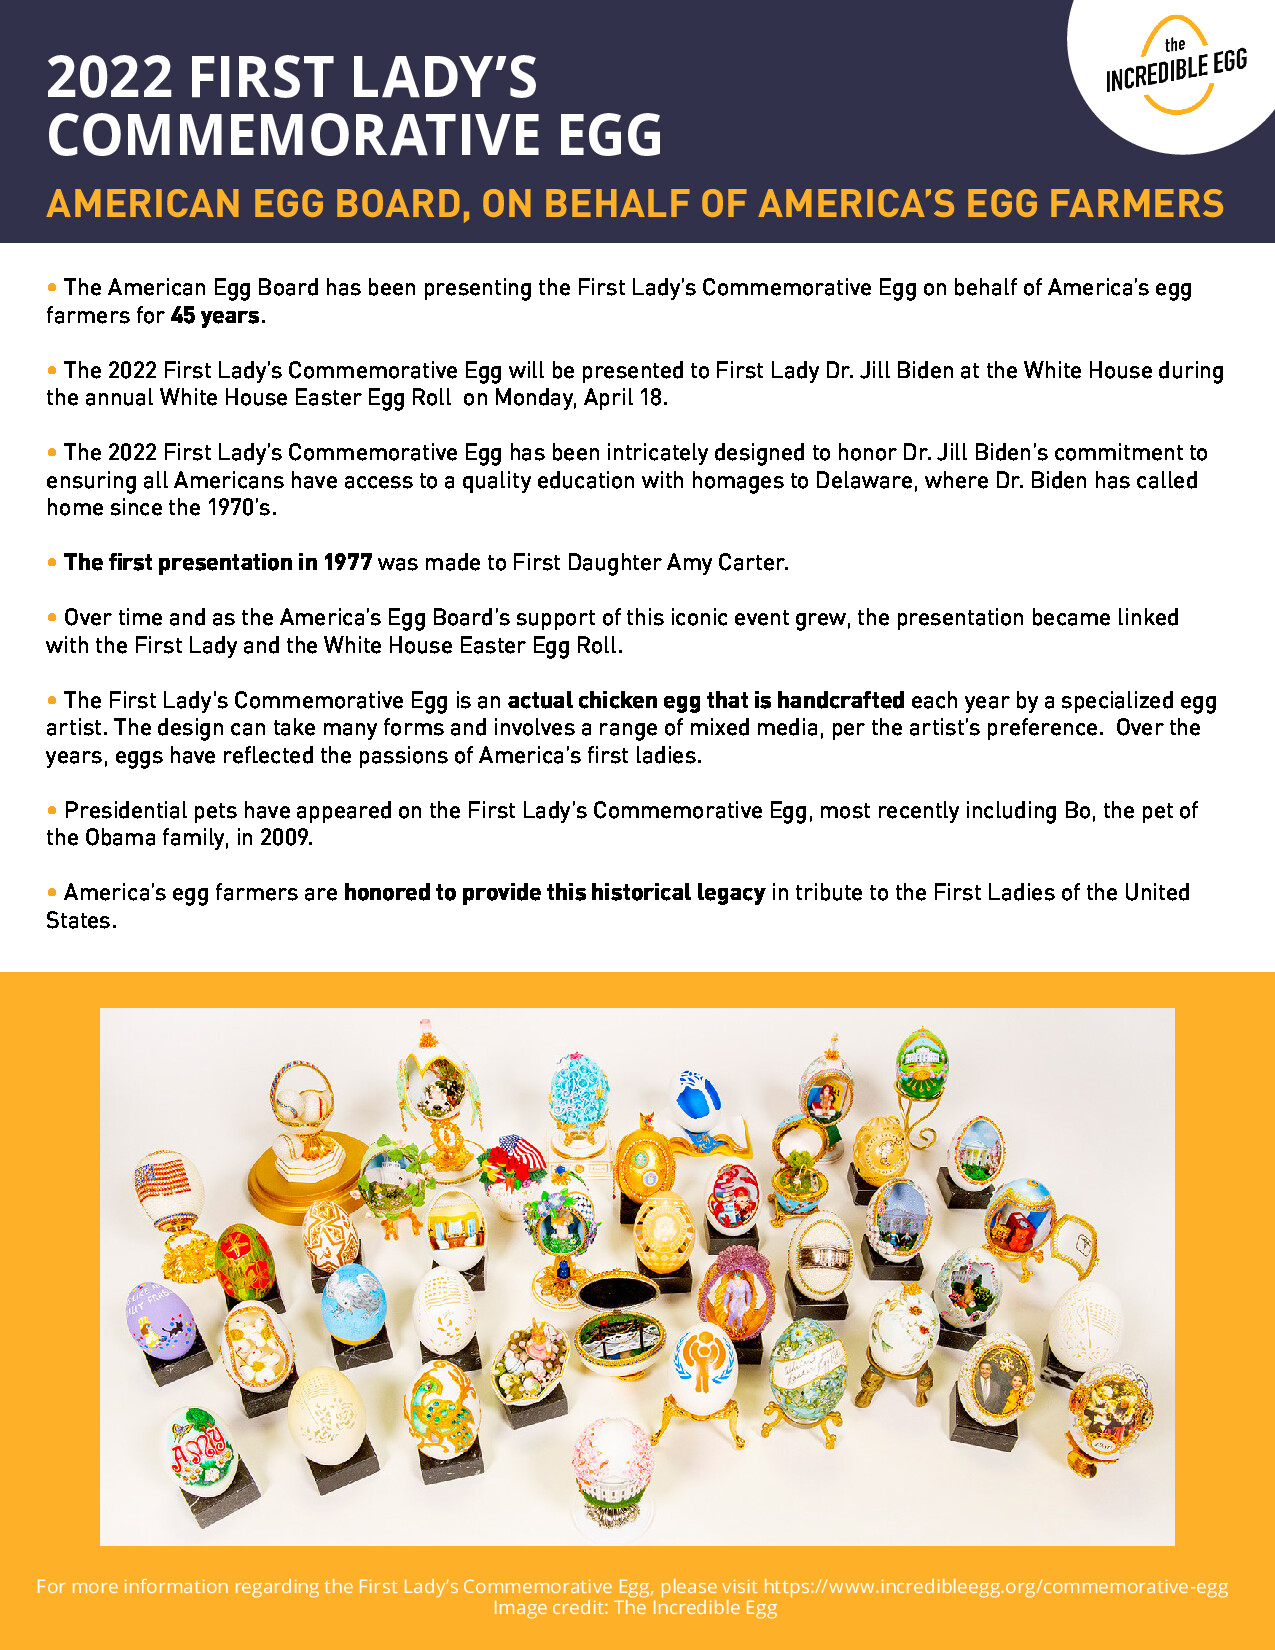 First Lady's Commemorative Egg Fact Sheet